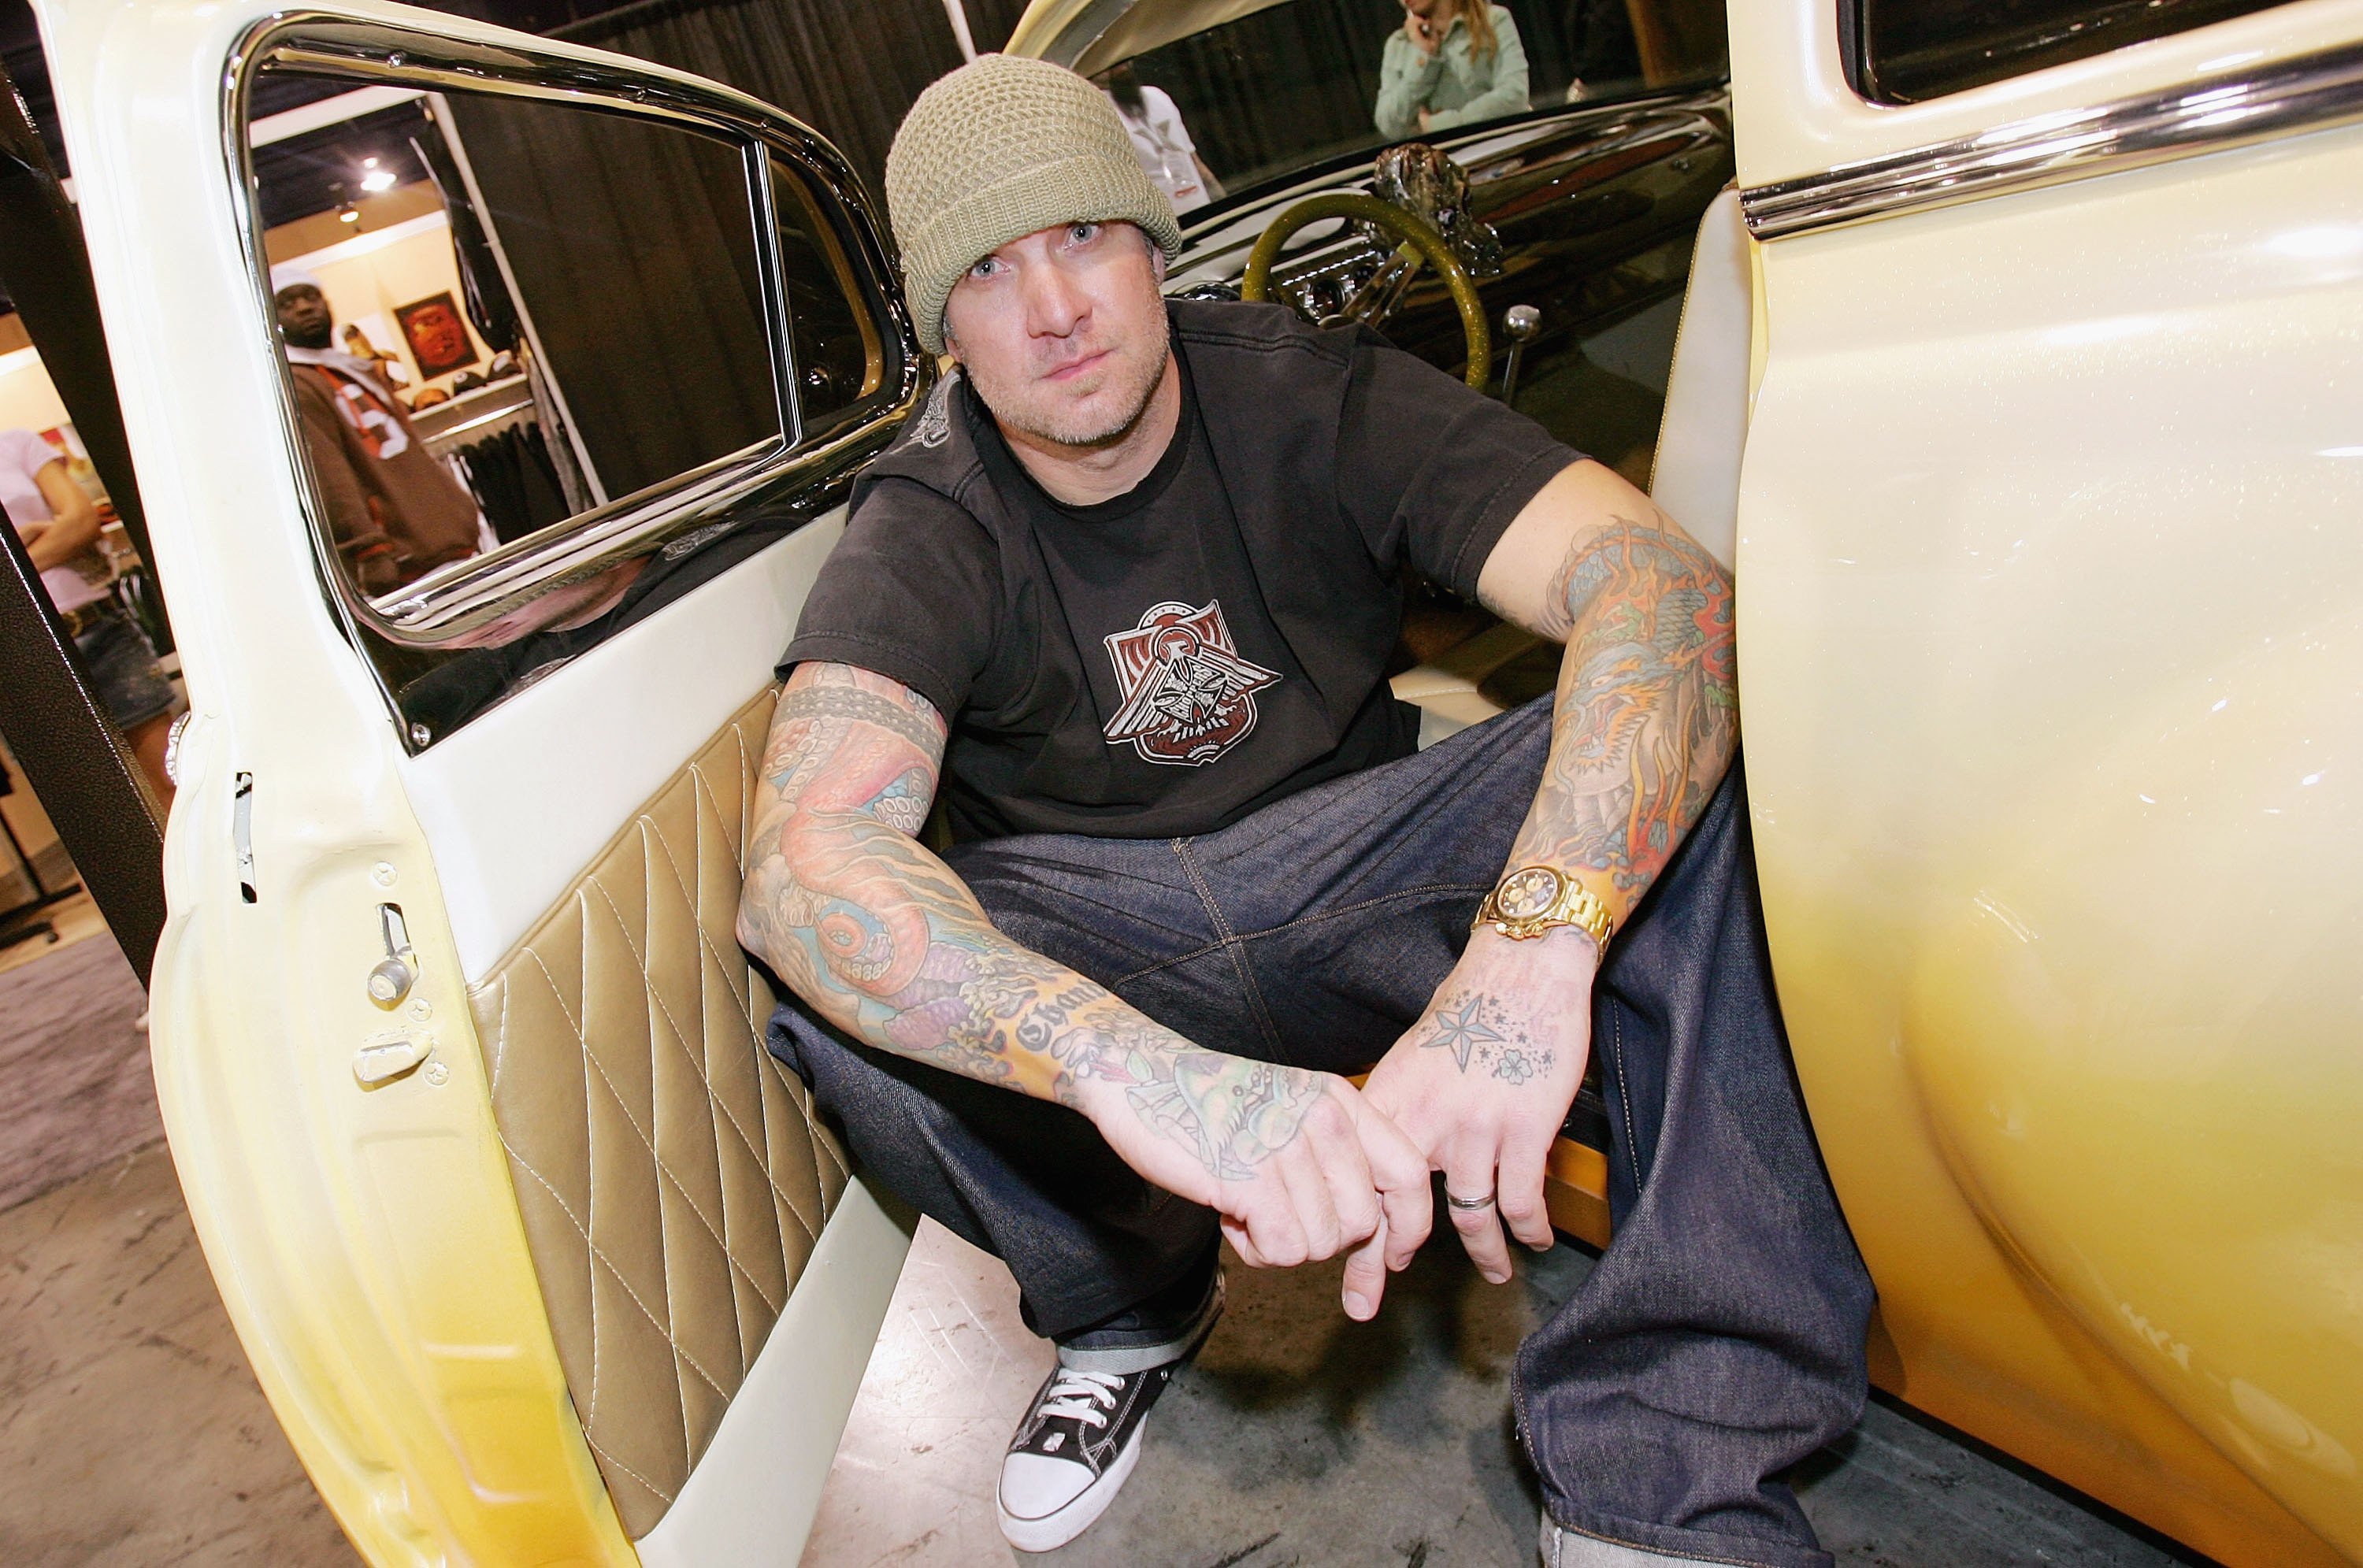 Jesse James poses in a 1954 Chevrolet at the MAGIC convention held at the Las Vegas Convention Center February 22, 2006 in Las Vegas, Nevada. | Source: Getty Images